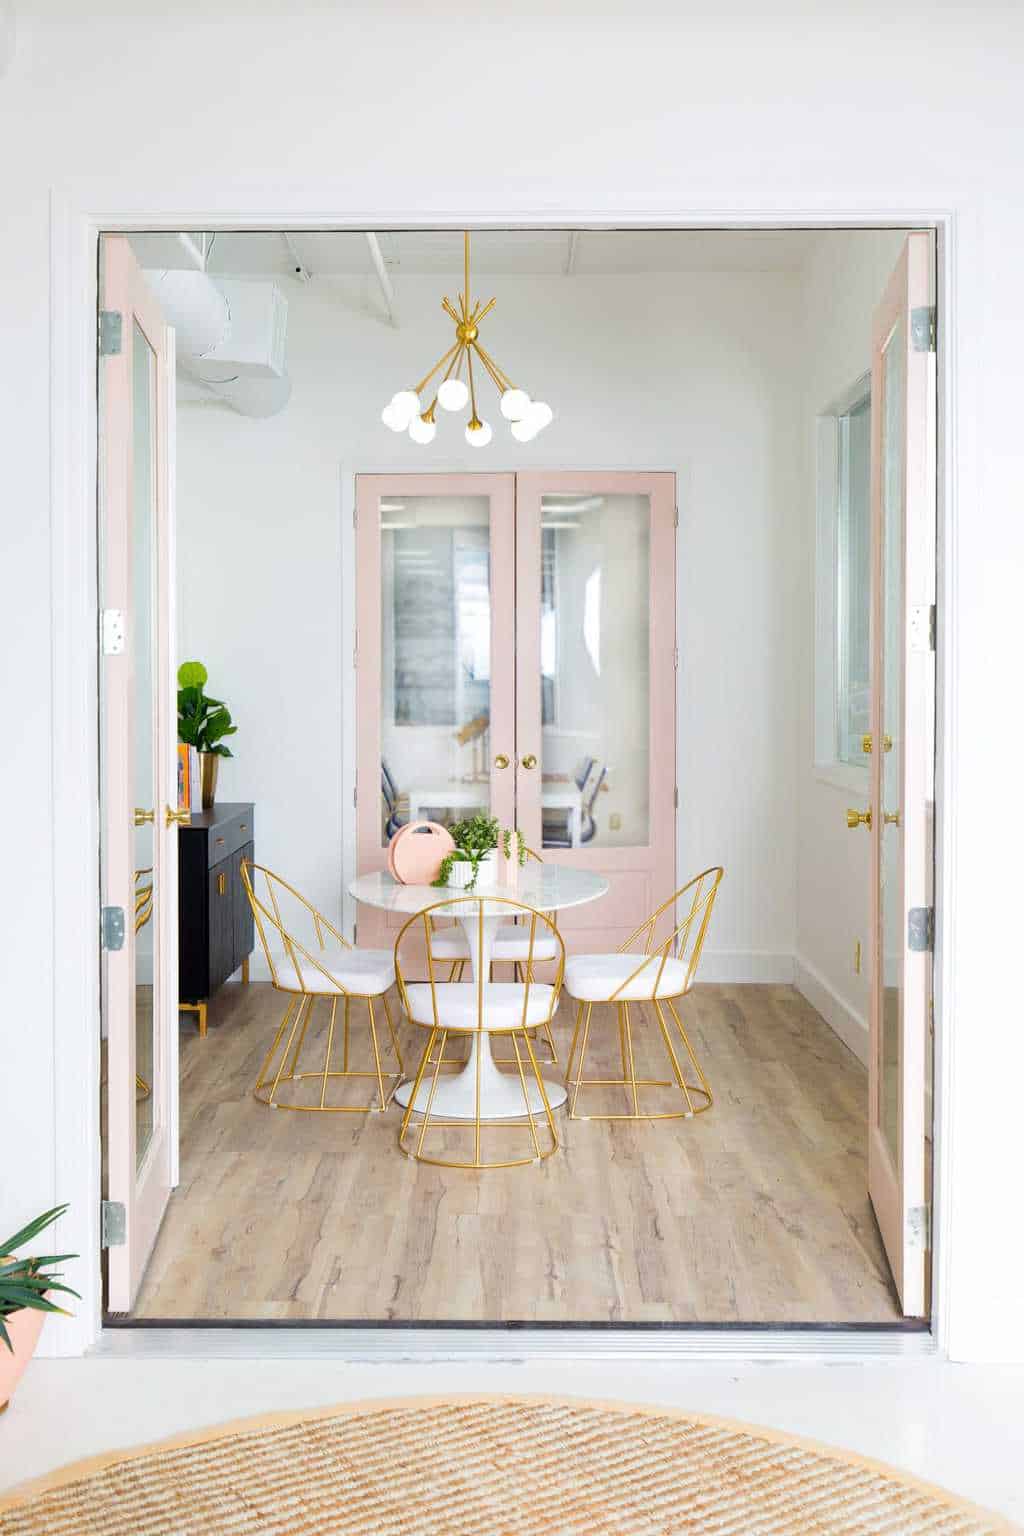 #SUGARANDCLOTHSTUDIO: Before + After of Our New Studio Meeting Room by top Houston Lifestyle blogger Ashley Rose of Sugar and Cloth